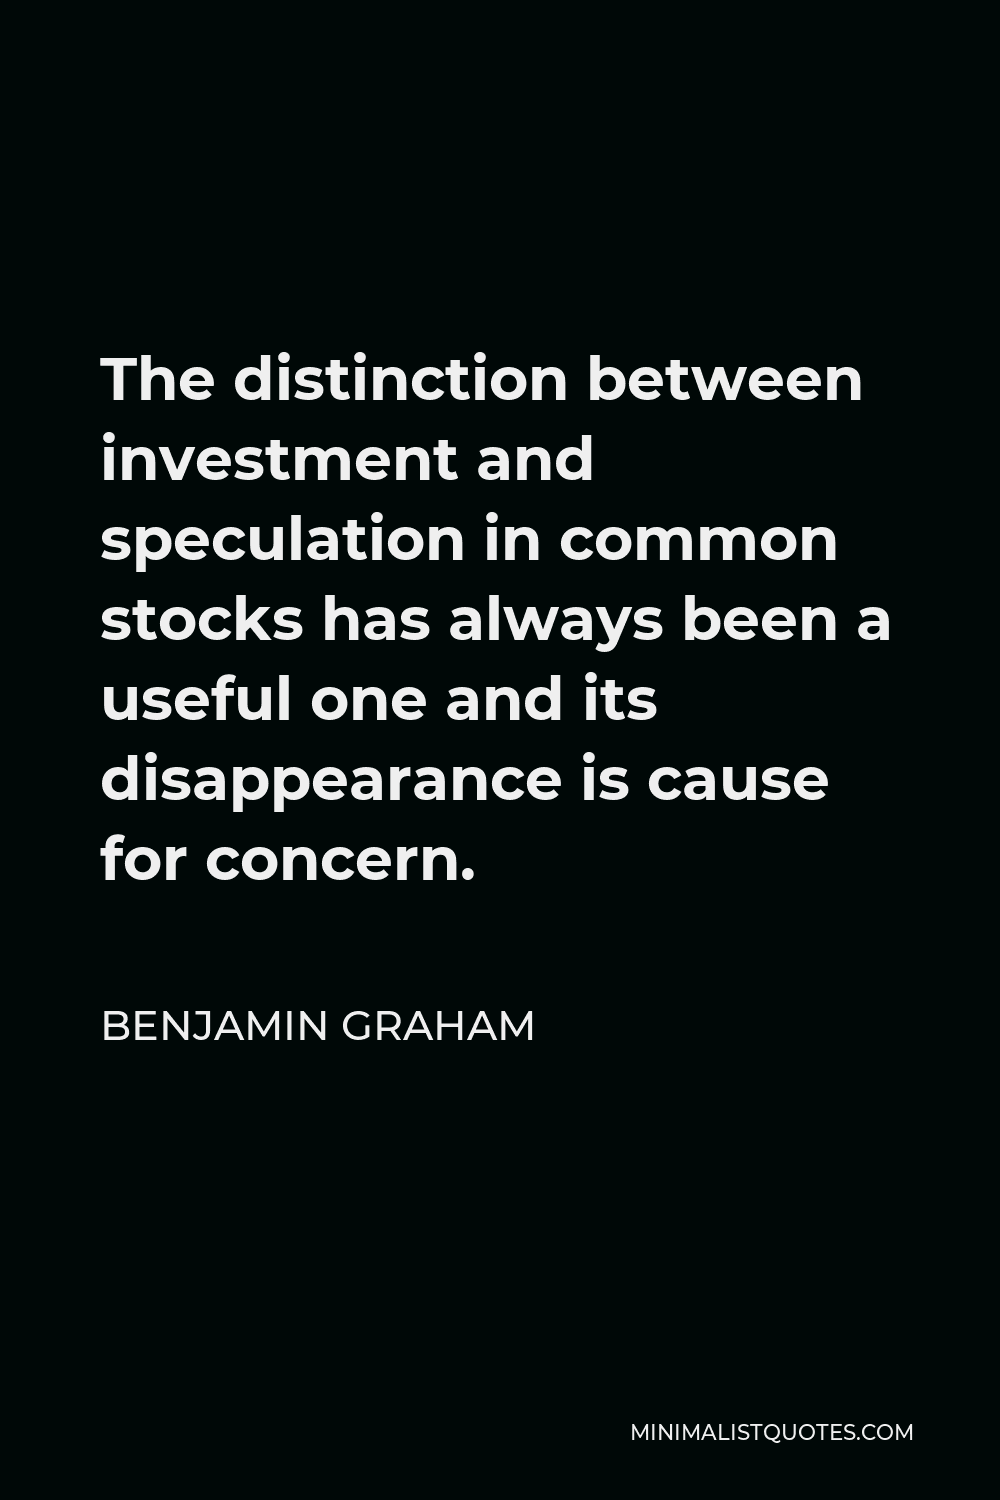 Benjamin Graham Quote - The distinction between investment and speculation in common stocks has always been a useful one and its disappearance is cause for concern.